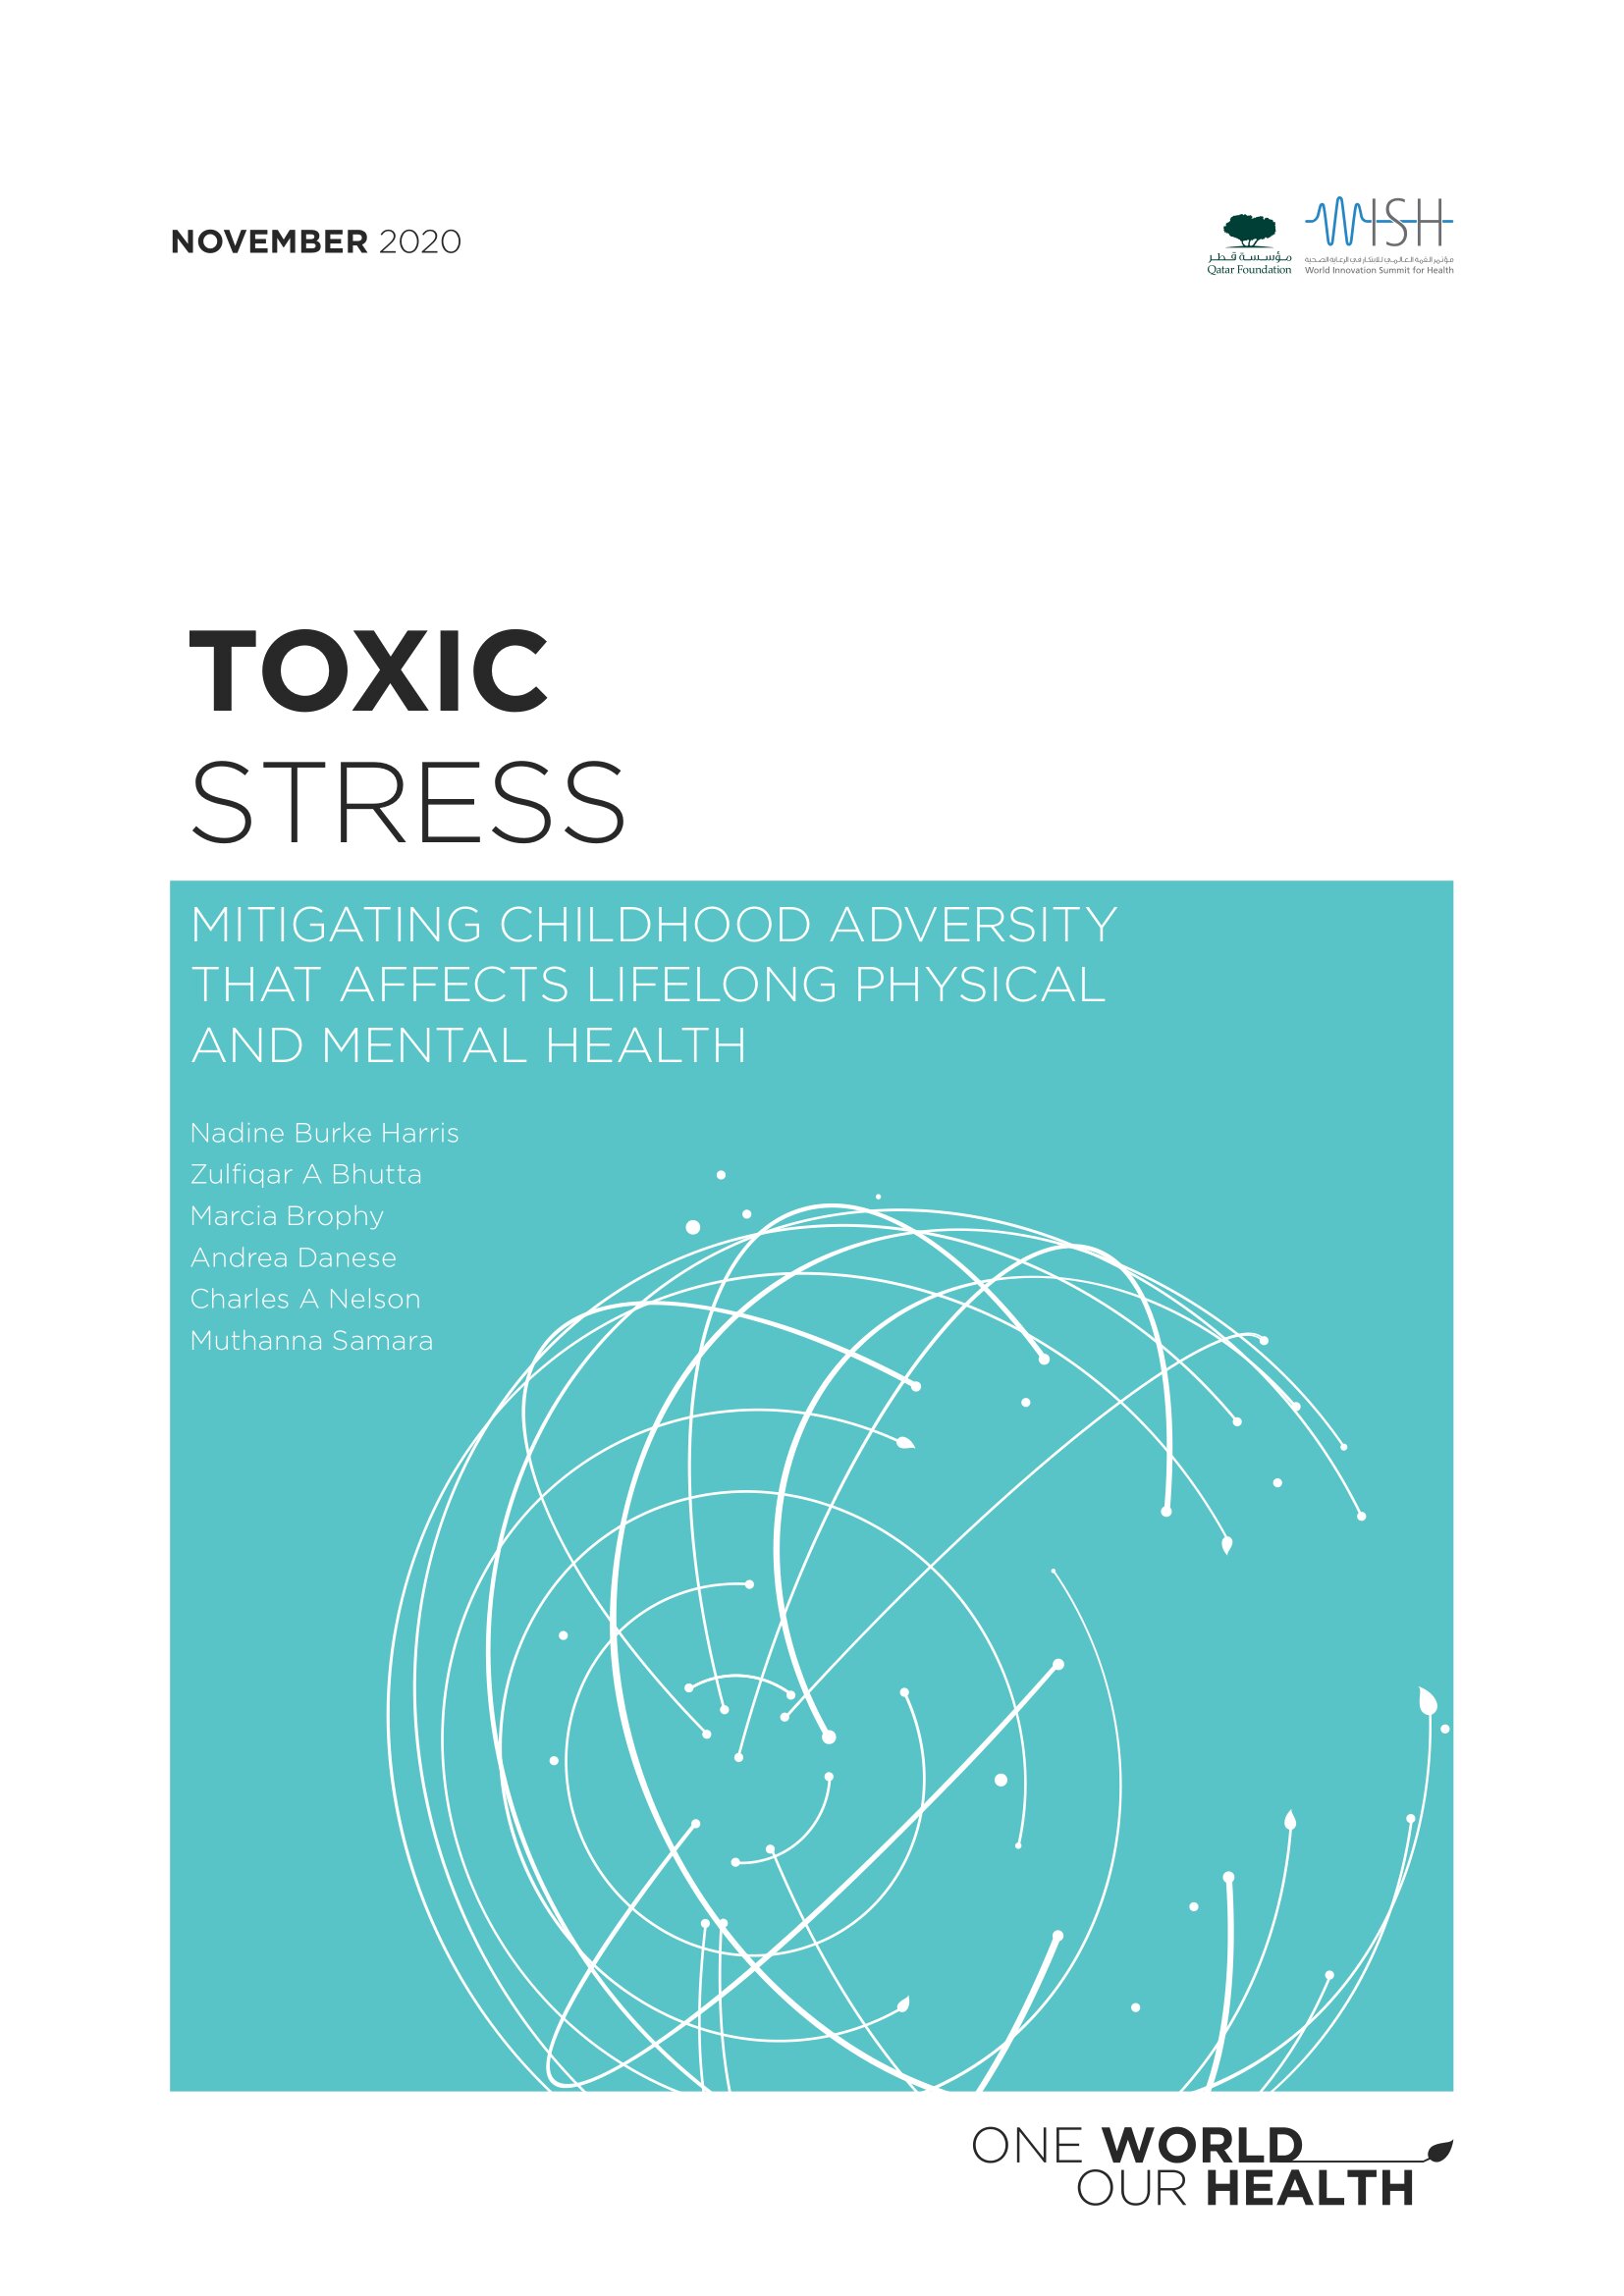 Toxic Stress Mitigating Childhood Adversity that affects Lifelong Physical and Mental Health